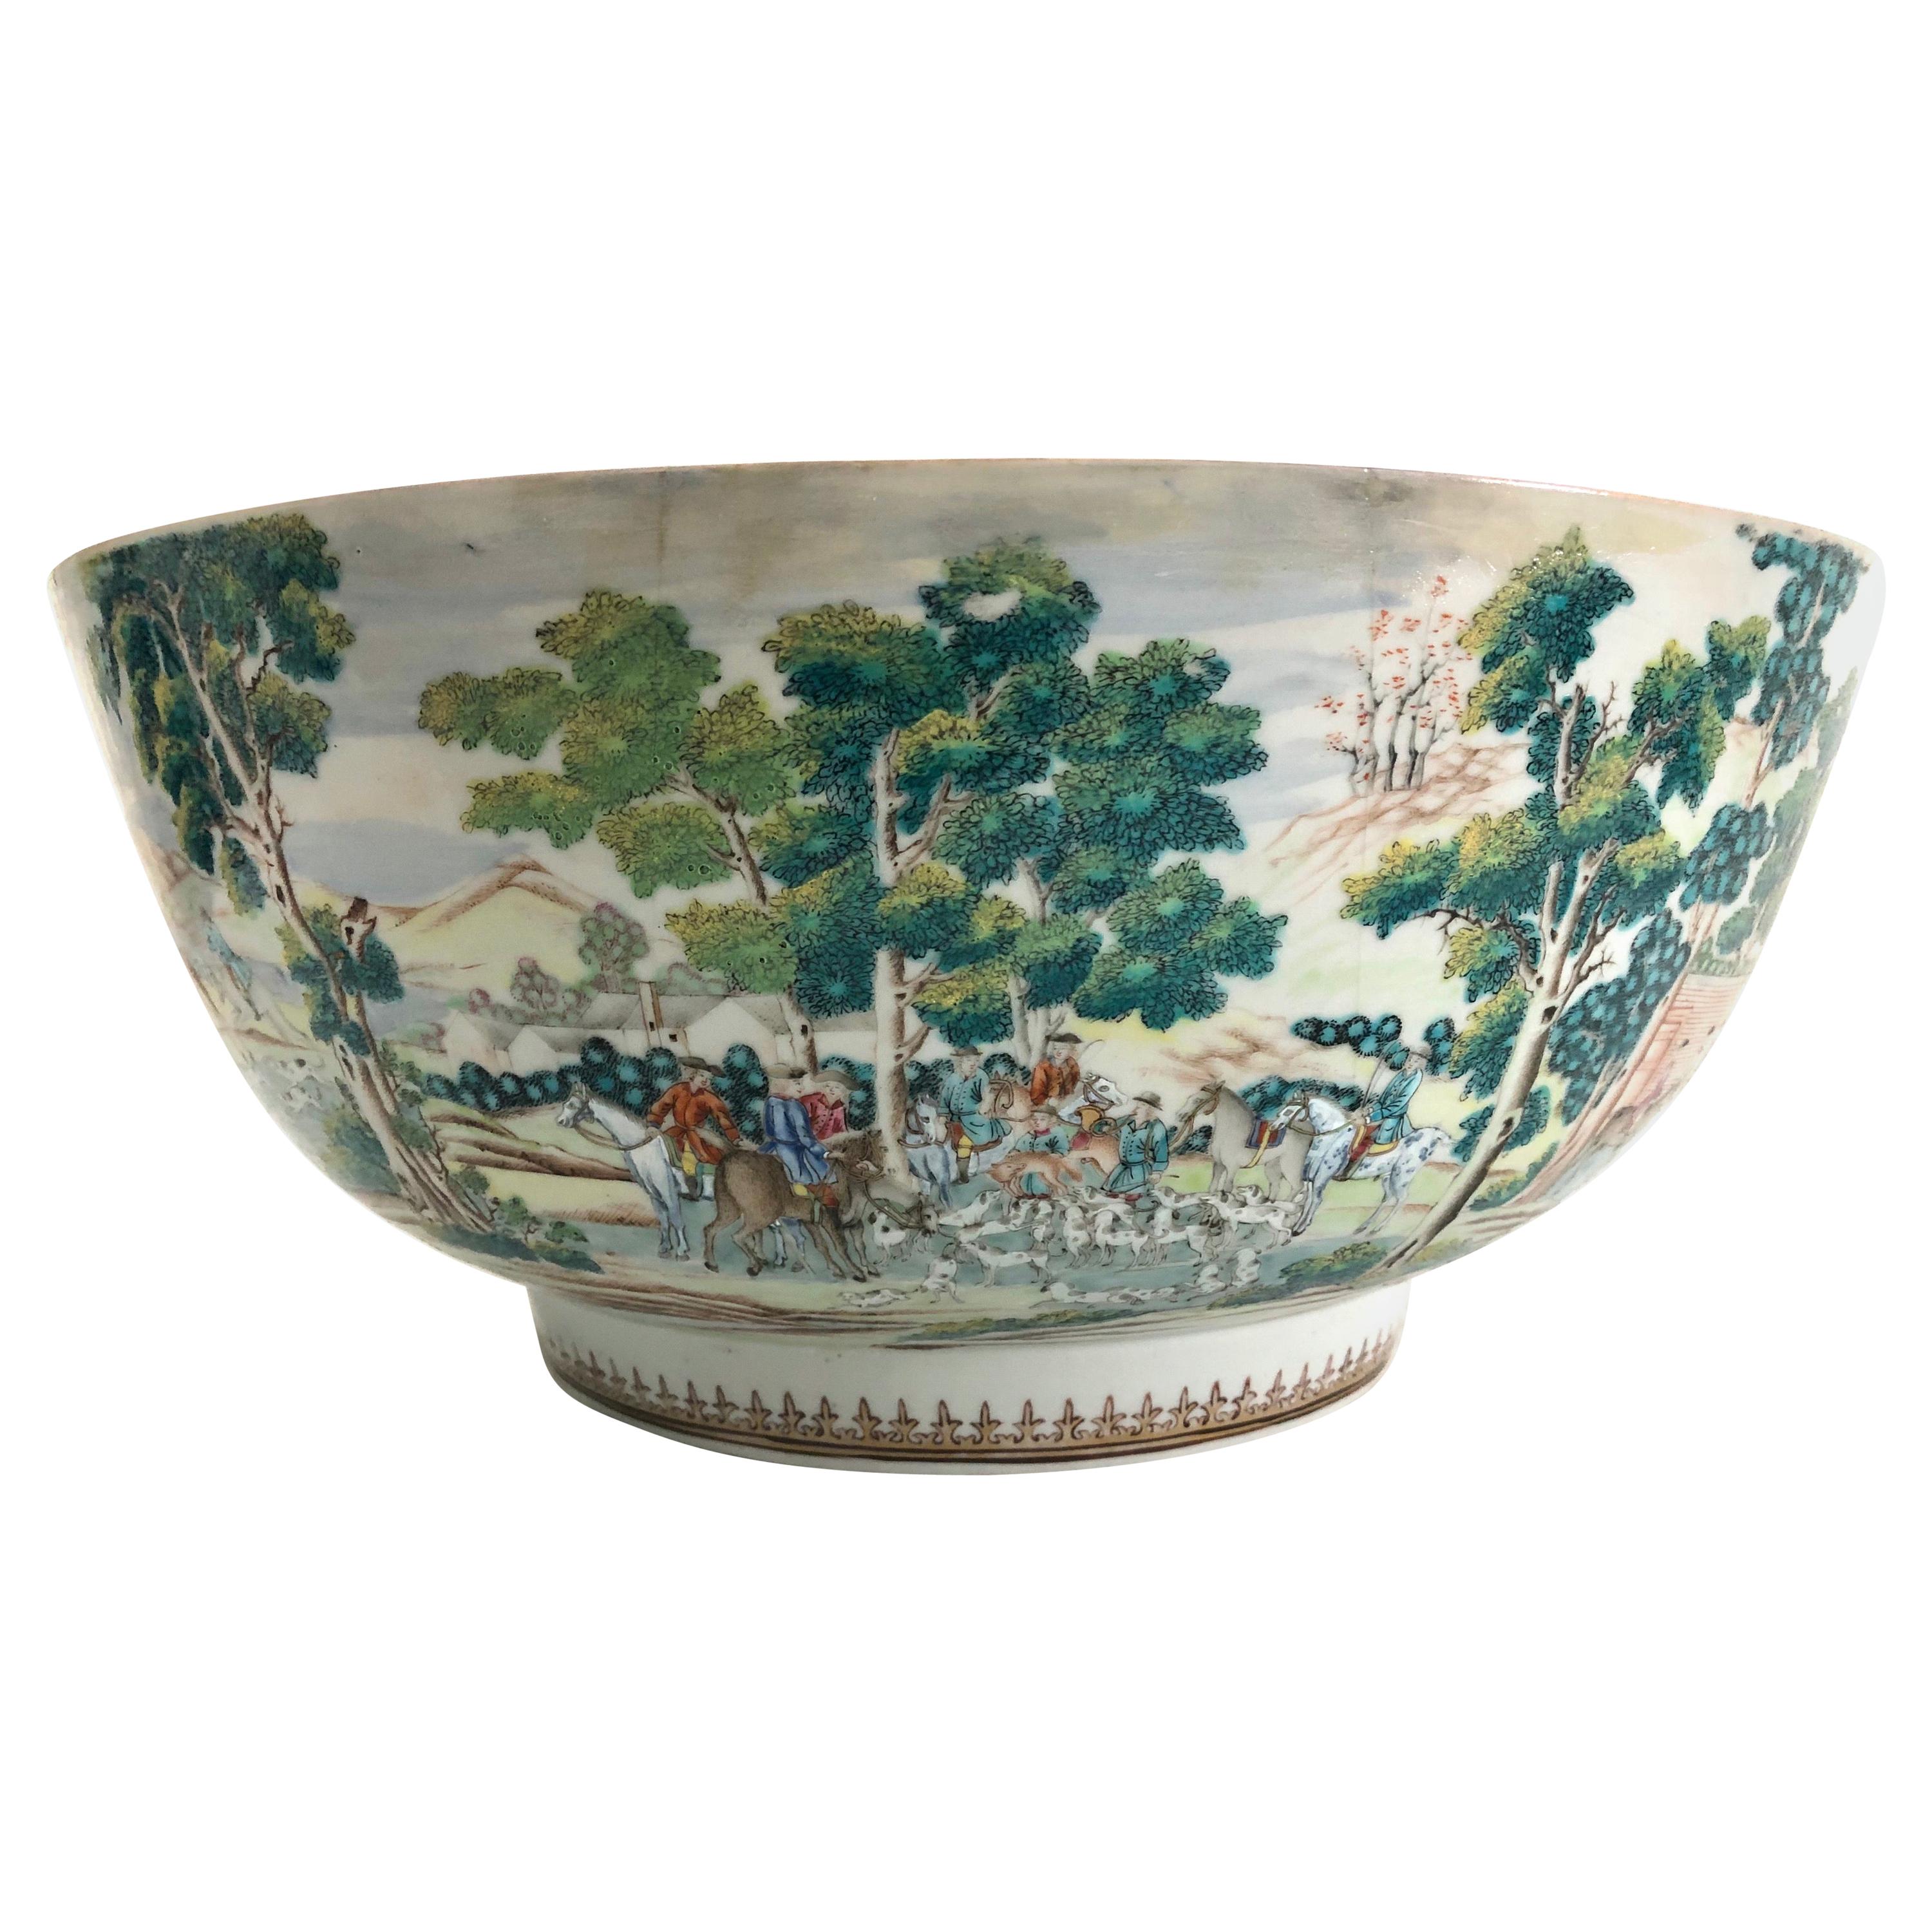 Extremely Rare 18th Century Chinese Export Porcelain Punch Bowl Fox Hunt Scene